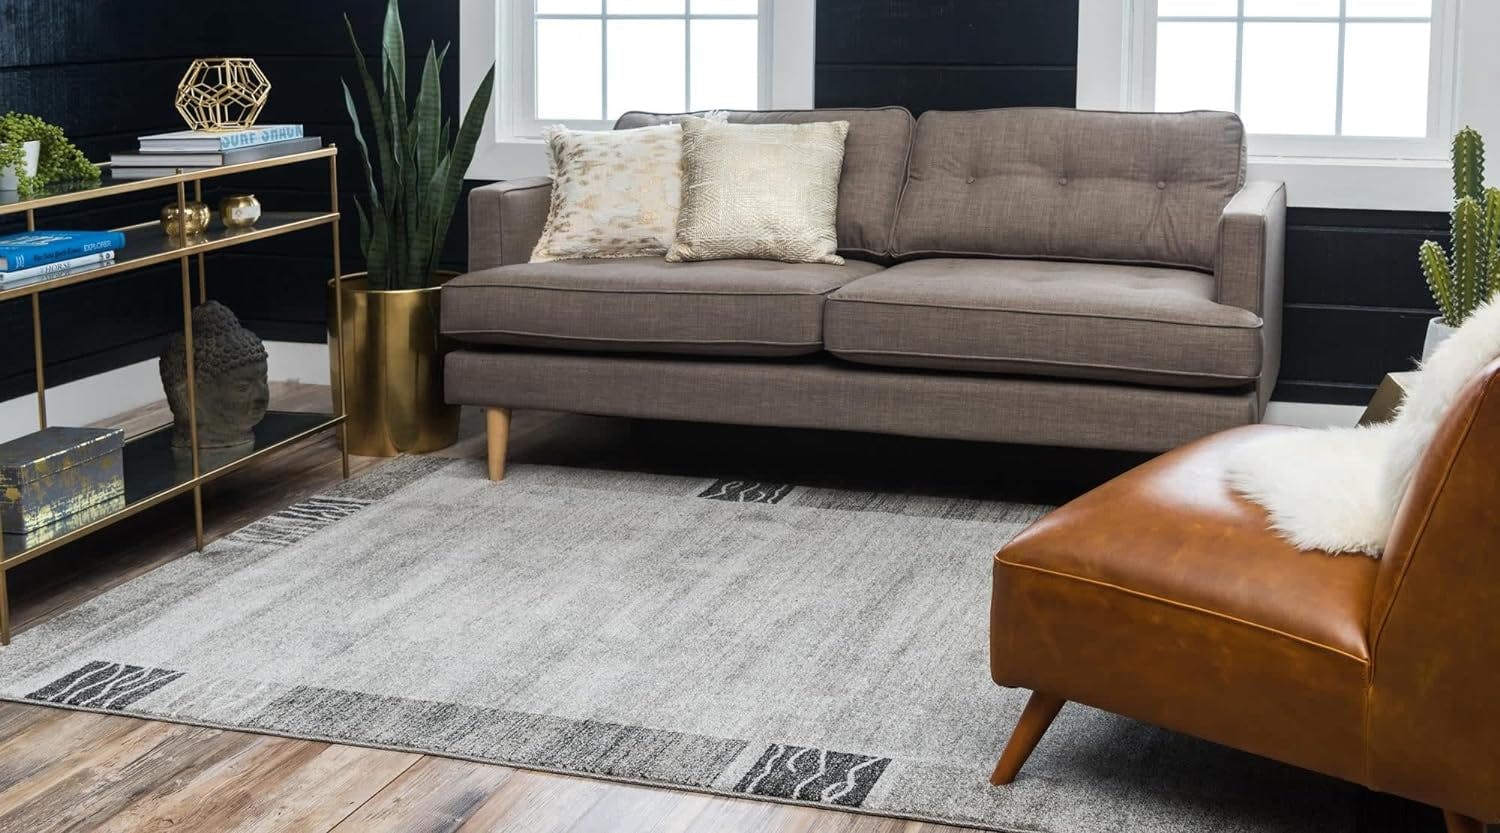 Modern Reversible Tufted Rug in Soft Gray - Easy Care, Stain-Resistant